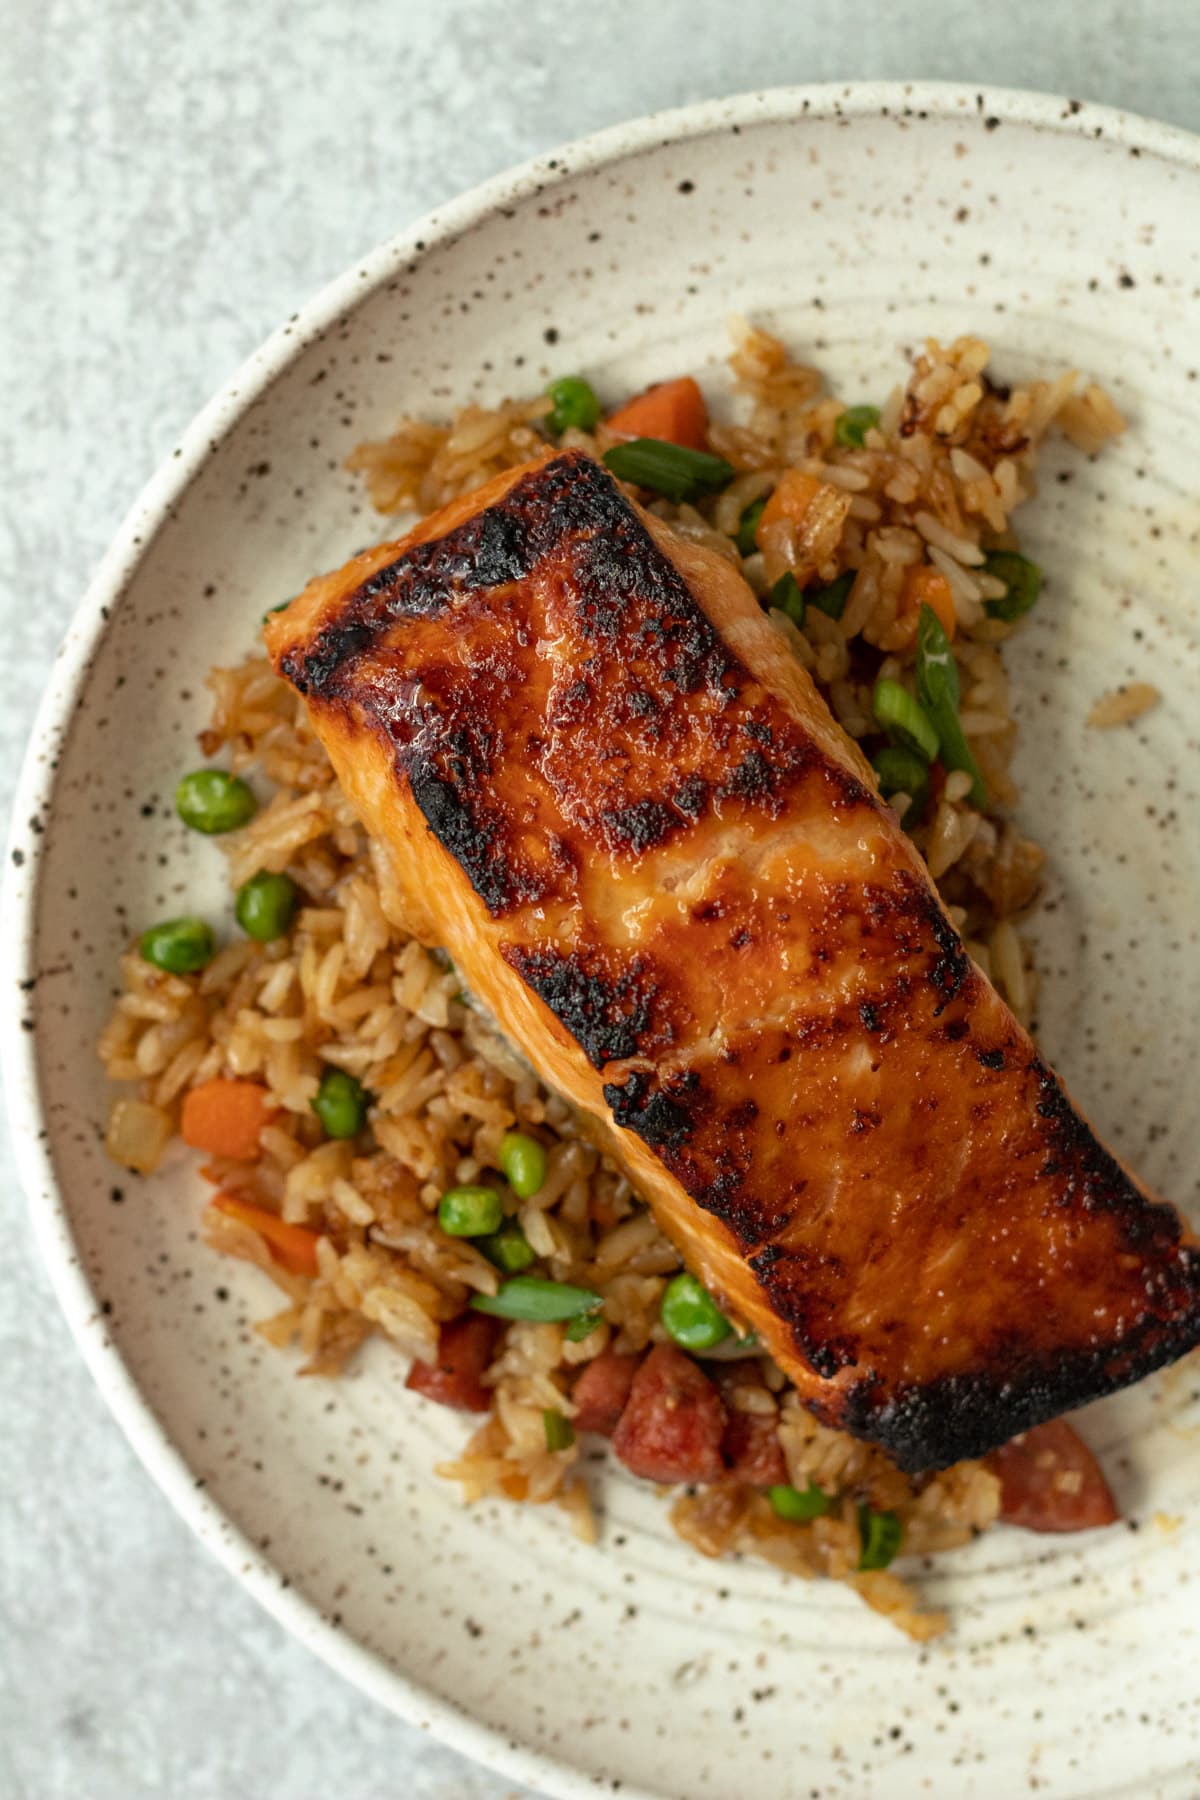 Salmon filet with miso-honey on bed of fried rice.